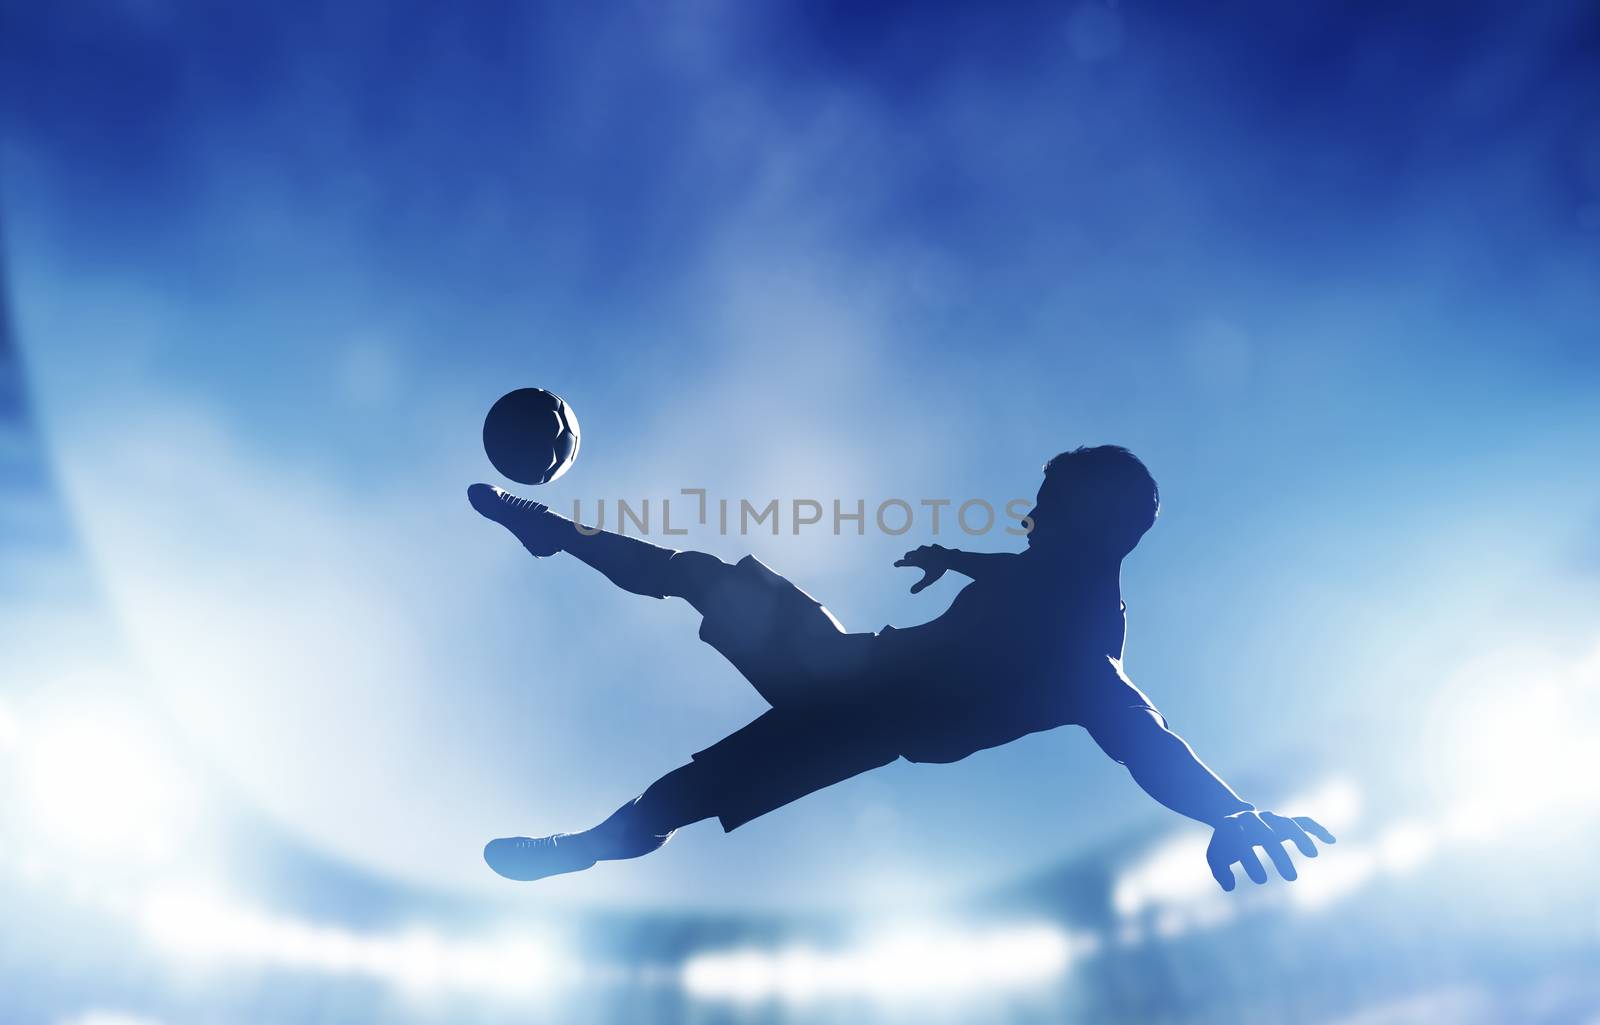 Football, soccer match. A player shooting on goal by photocreo